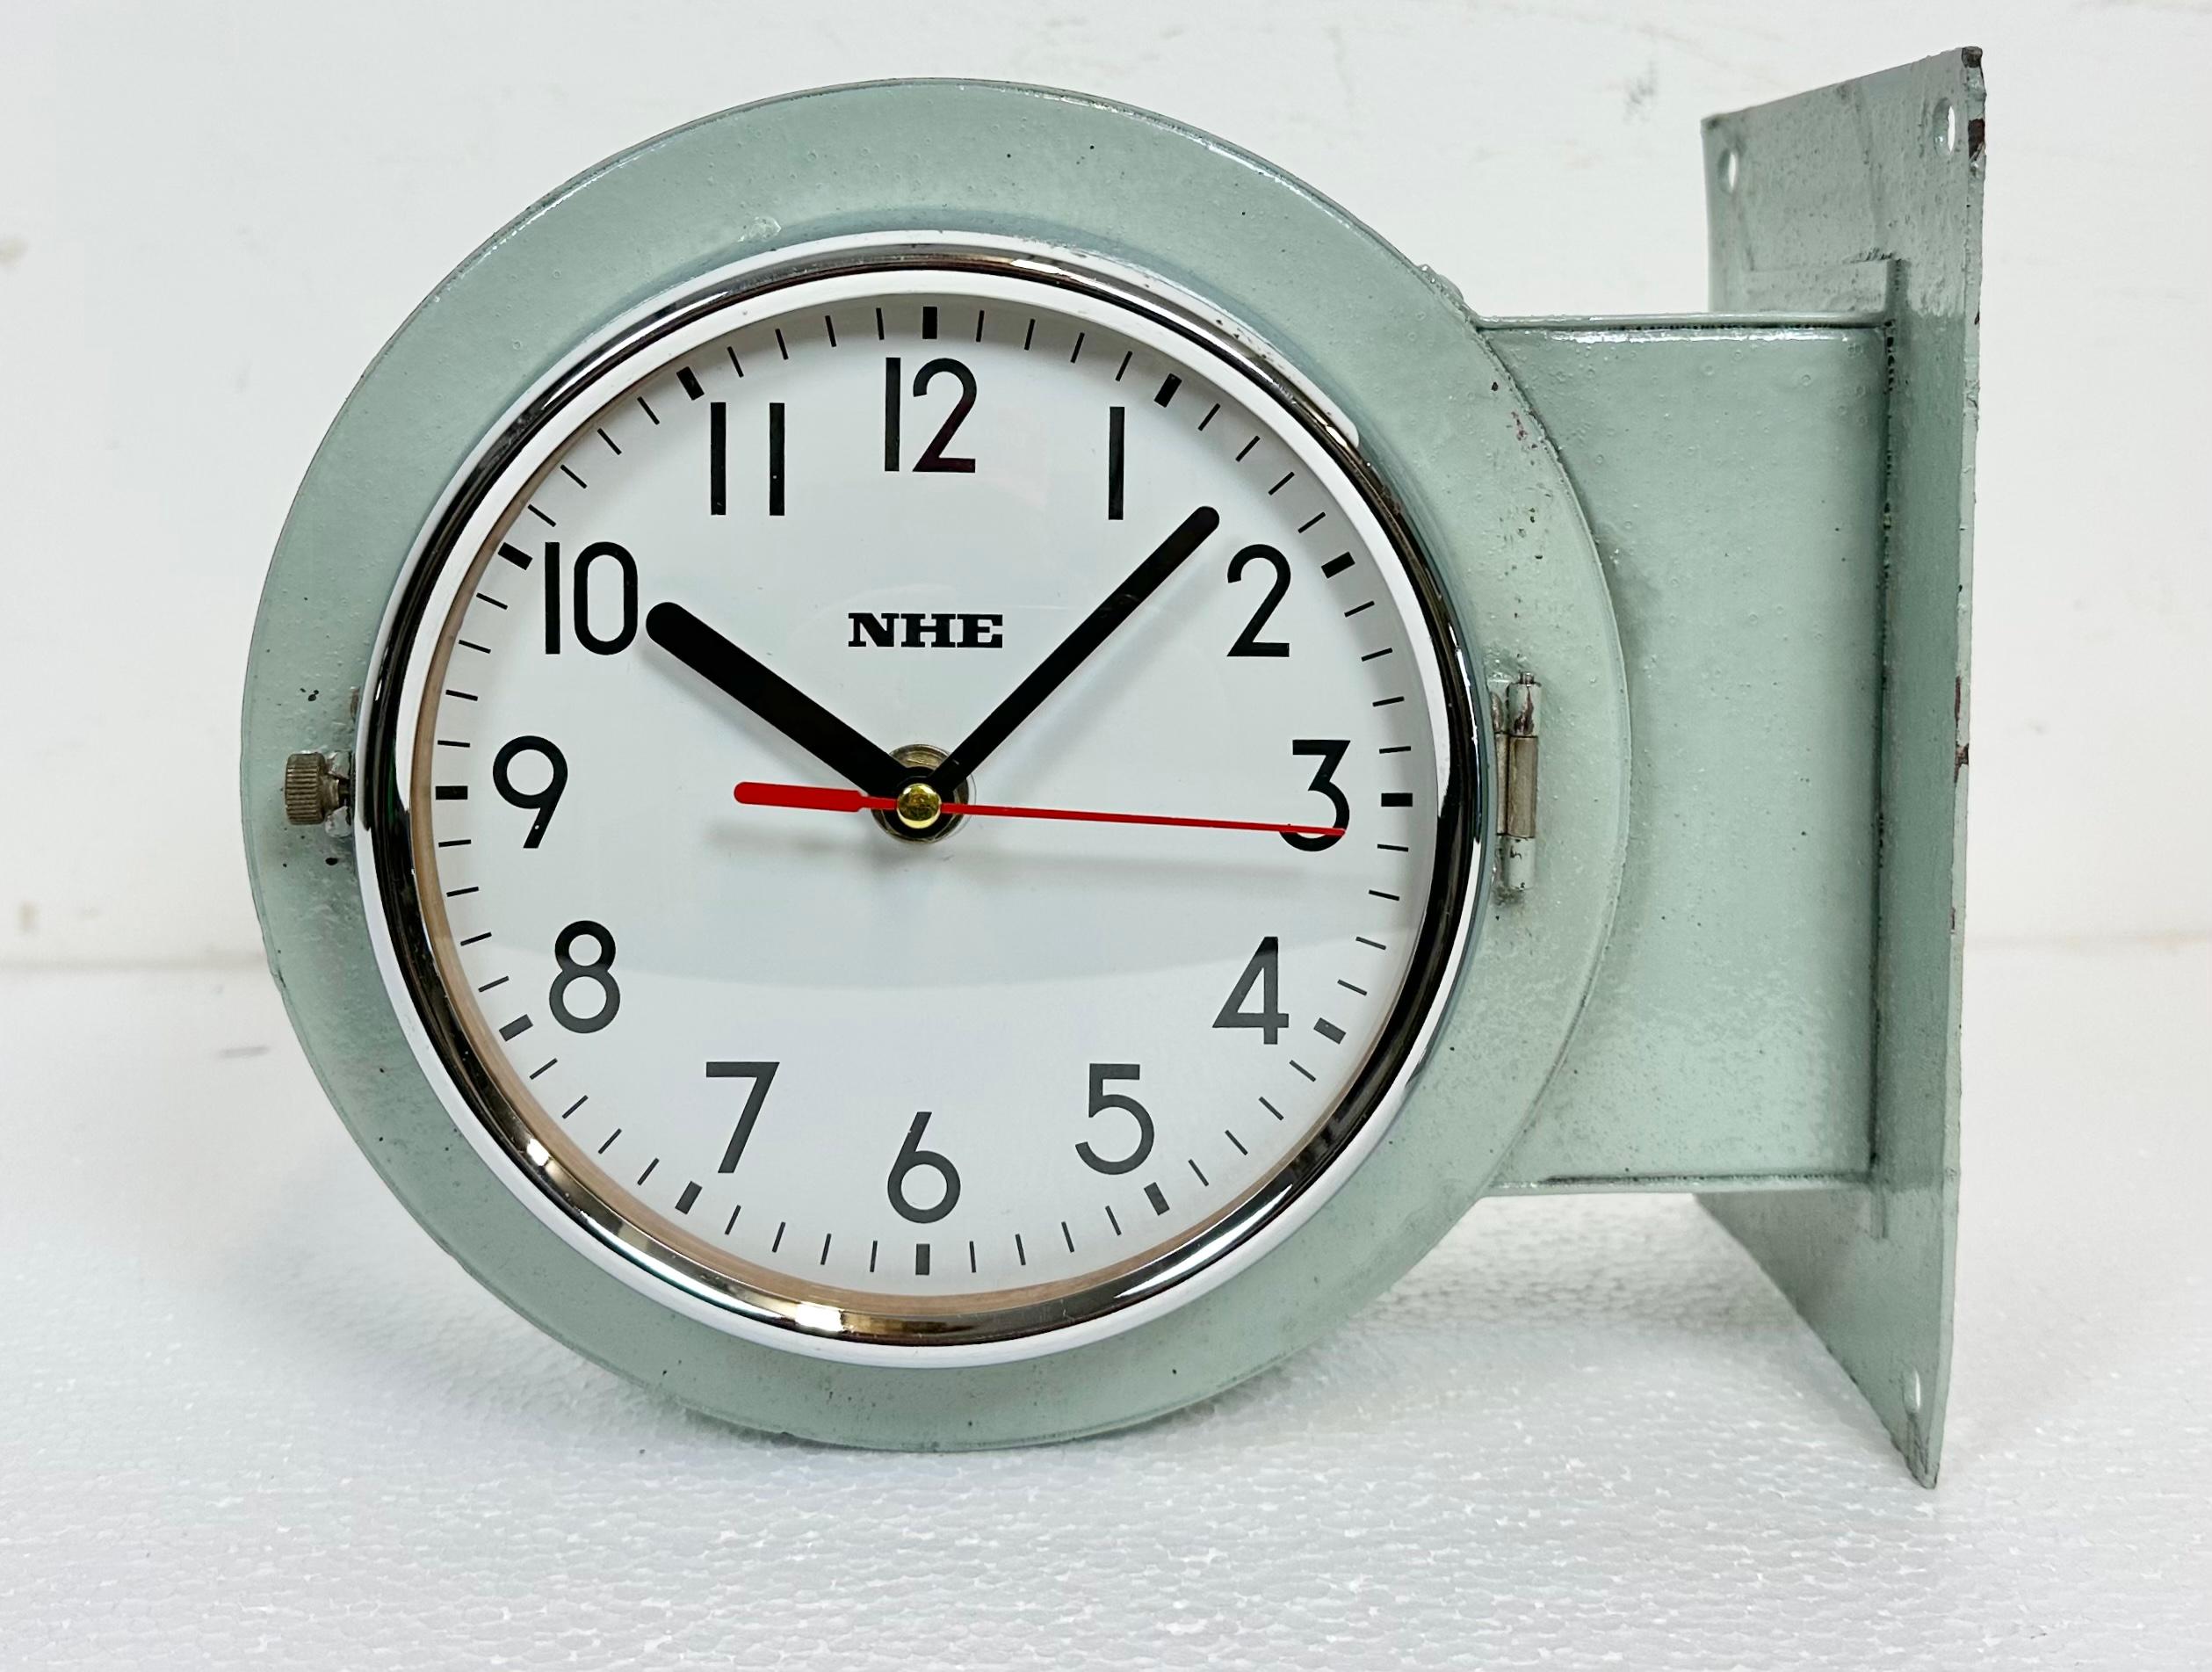 Vintage NHE ( NIPPON HAKUYO electronics,ltd. ) navy slave clock designed during the 1980s in Japan. These clocks were used on large Japanese tankers and cargo ships. It features a light green metal body, a metal dials and a convex clear glass covers